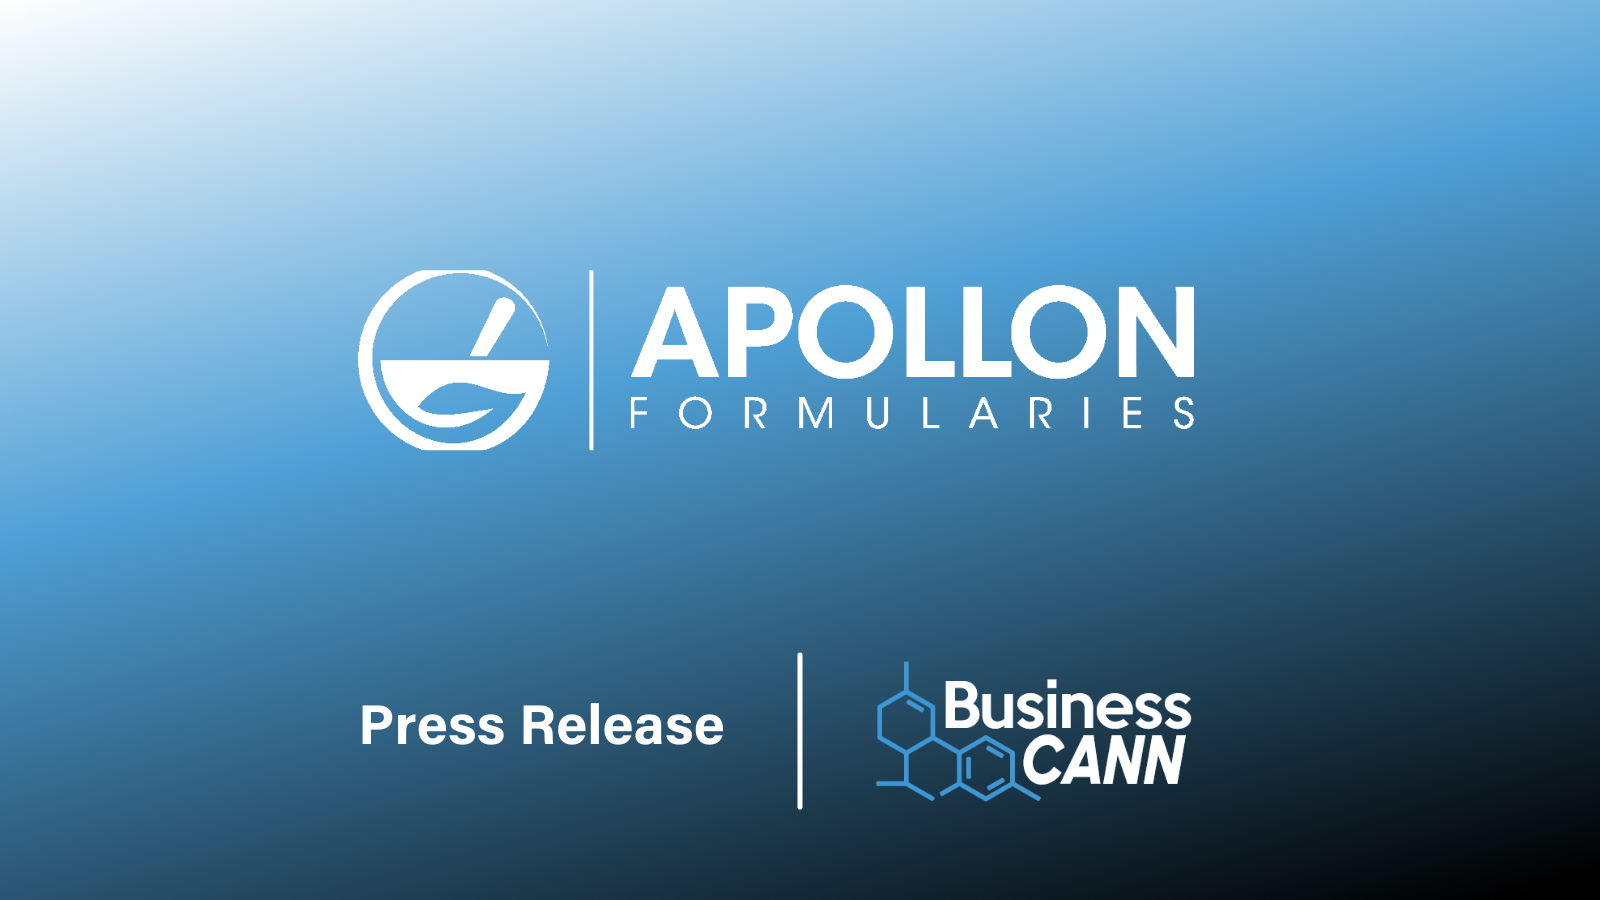 APOLLON Formularies is delighted to announce that its Jamaican affiliate, Apollon Formularies Jamaica Ltd ("Apollon Jamaica"), has reached an agreement to acquire Citiva Jamaica LLC ("Citiva Jamaica") (the "Acquisition") in a part-cash, part-shares transaction.